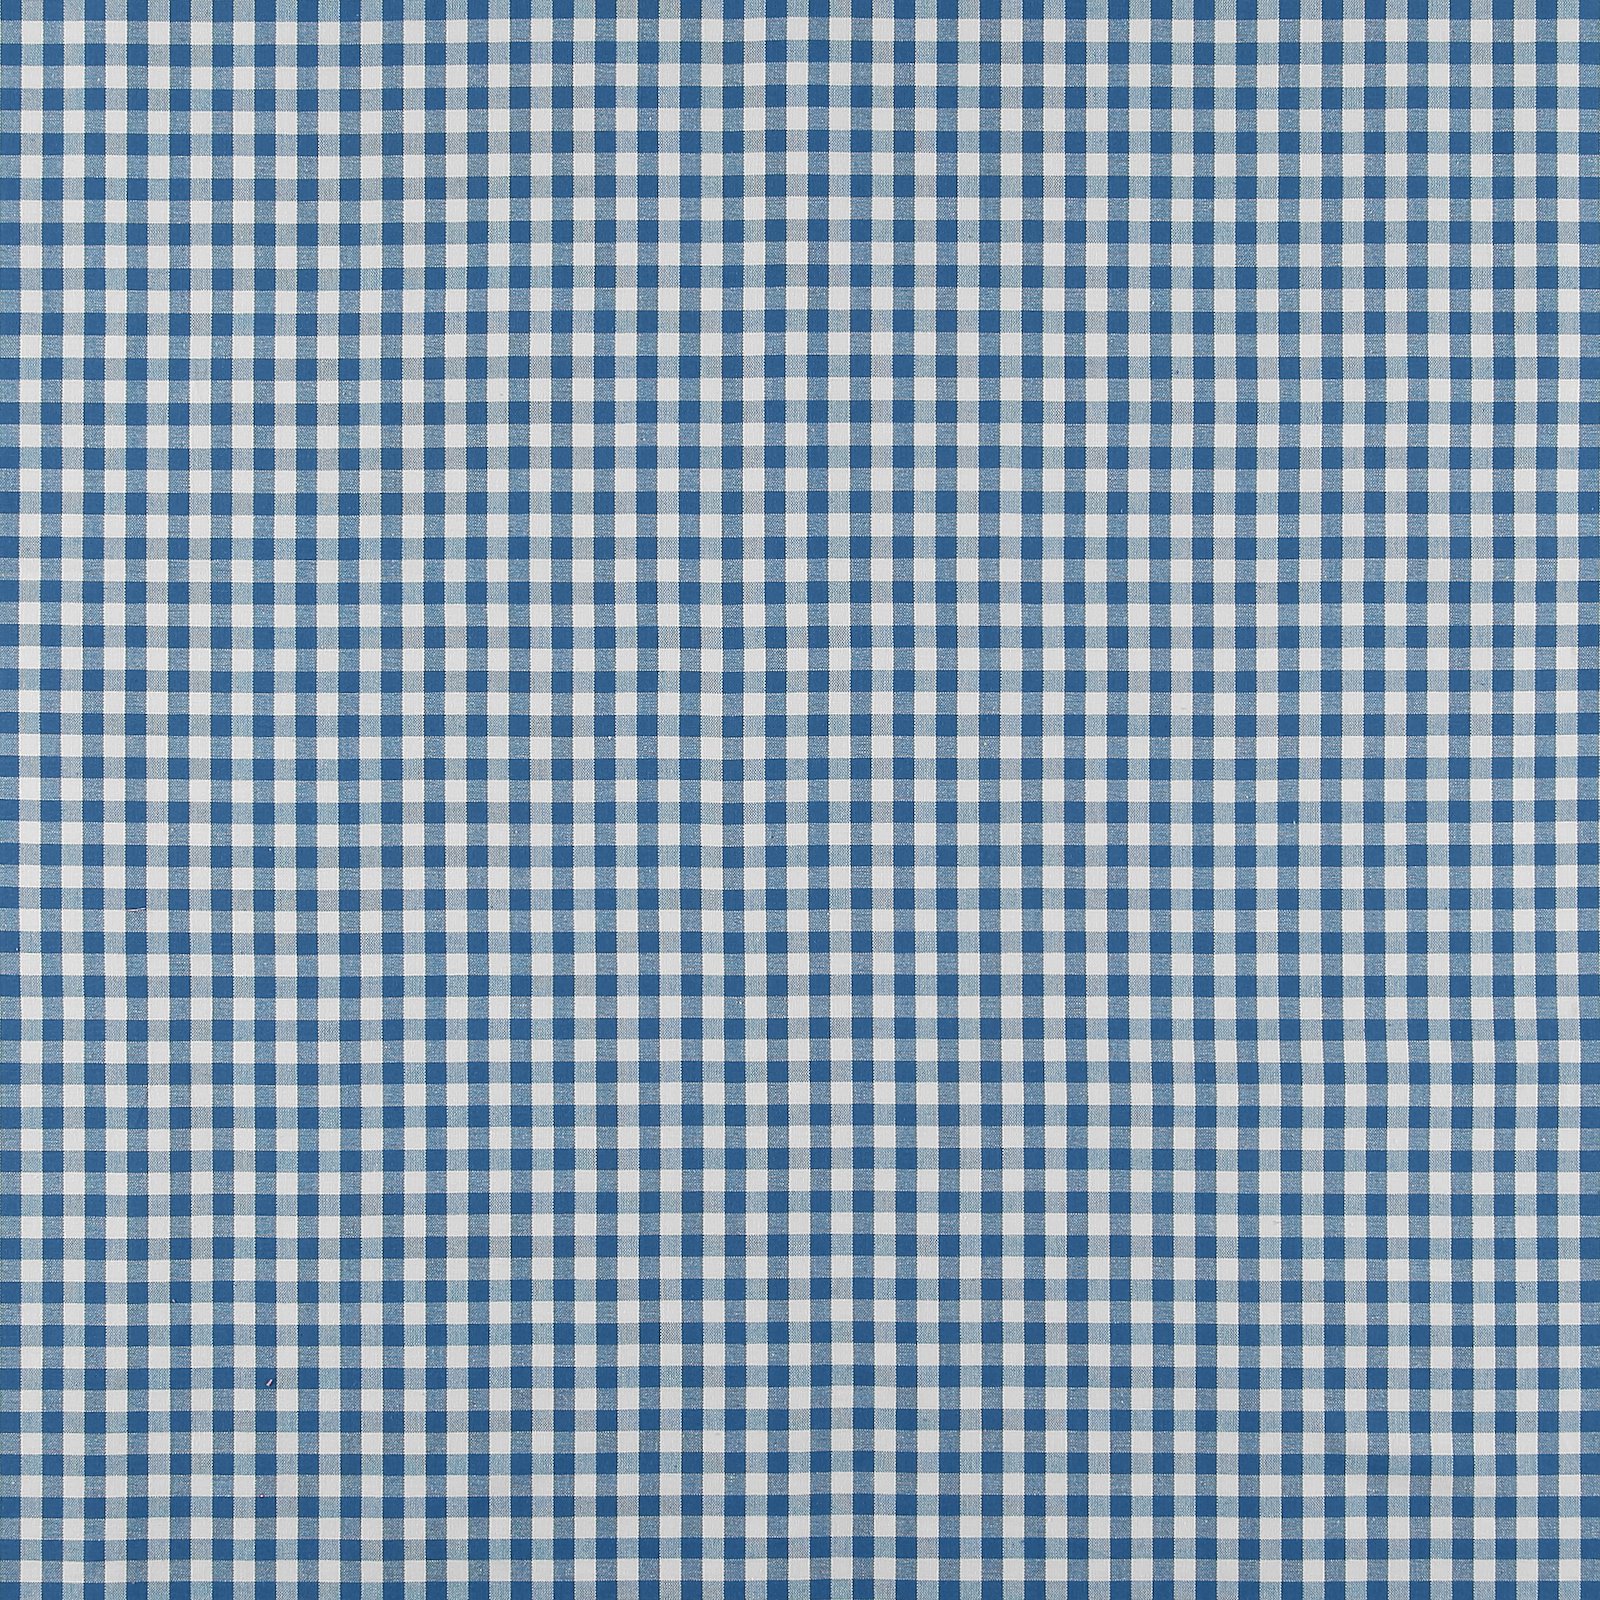 Cotton yarn dyed bright blue/white check 816295_pack_sp